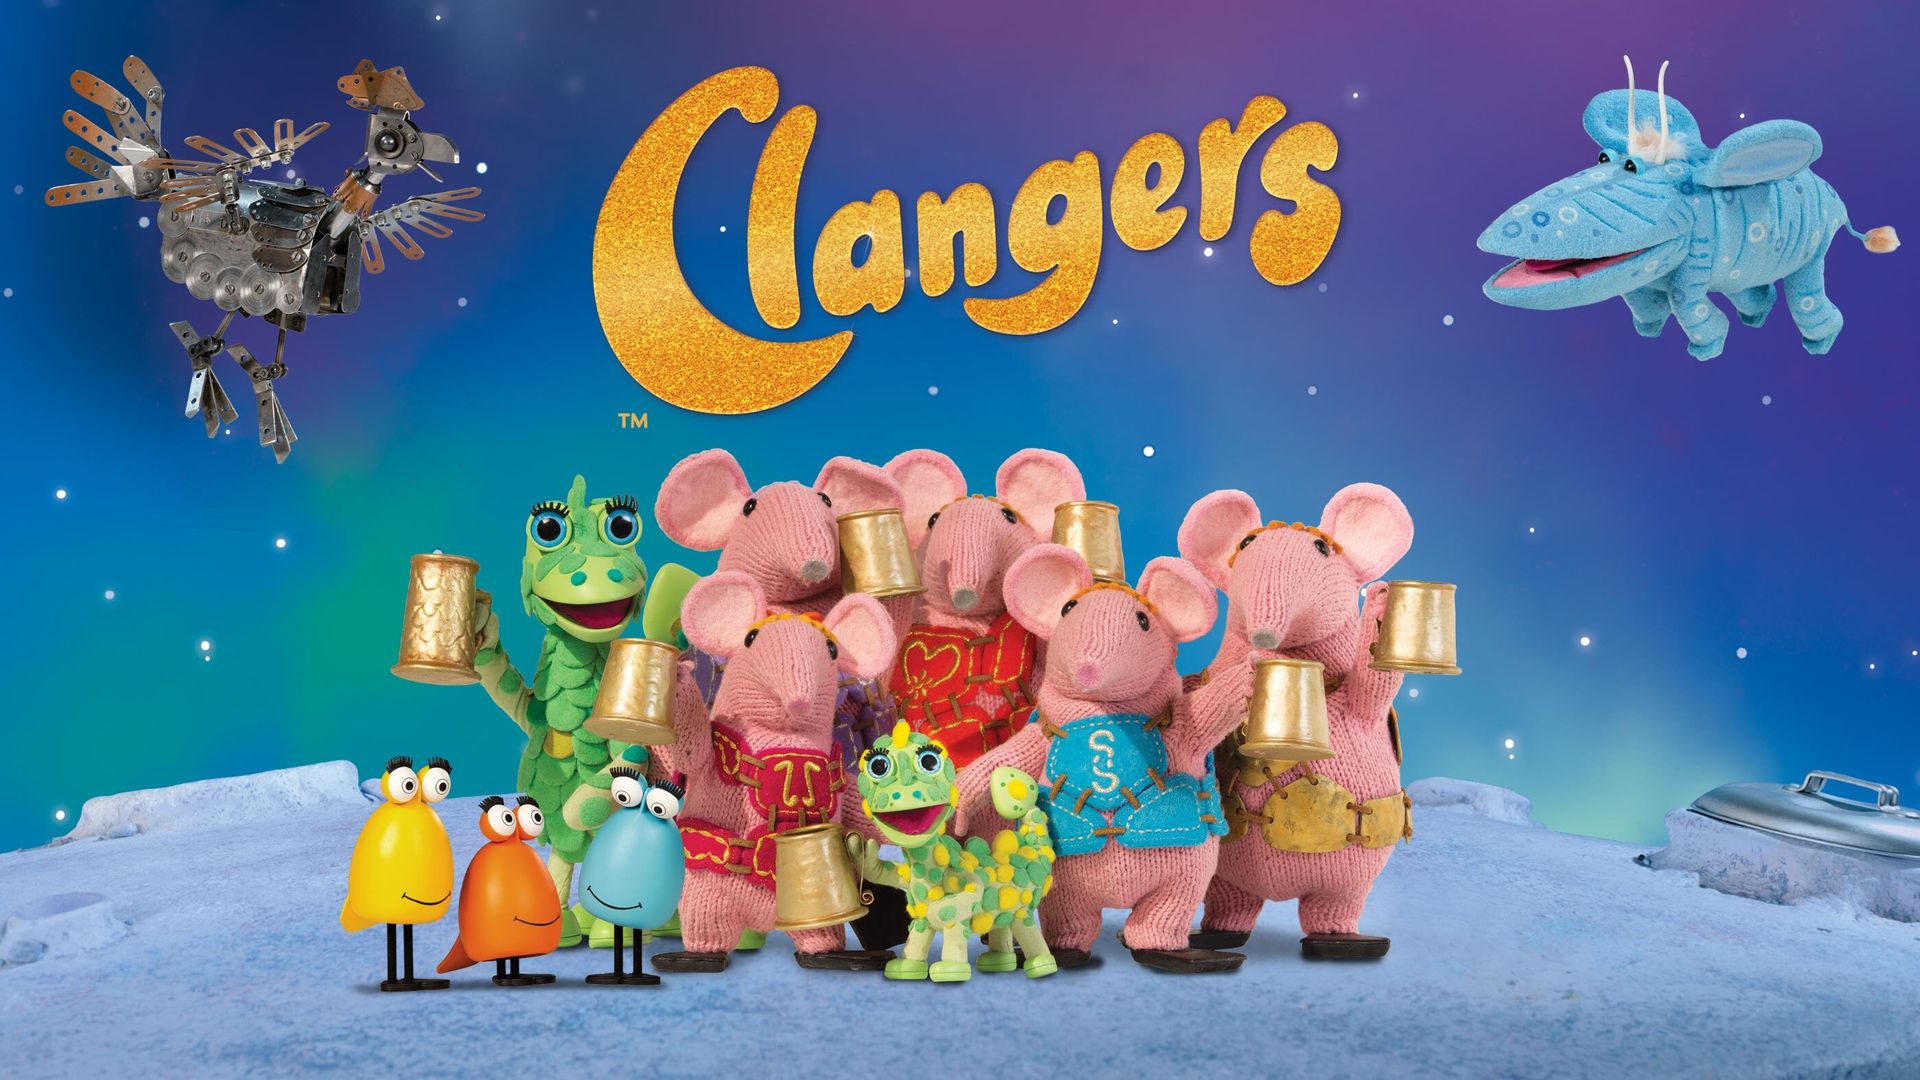 The Clangers background